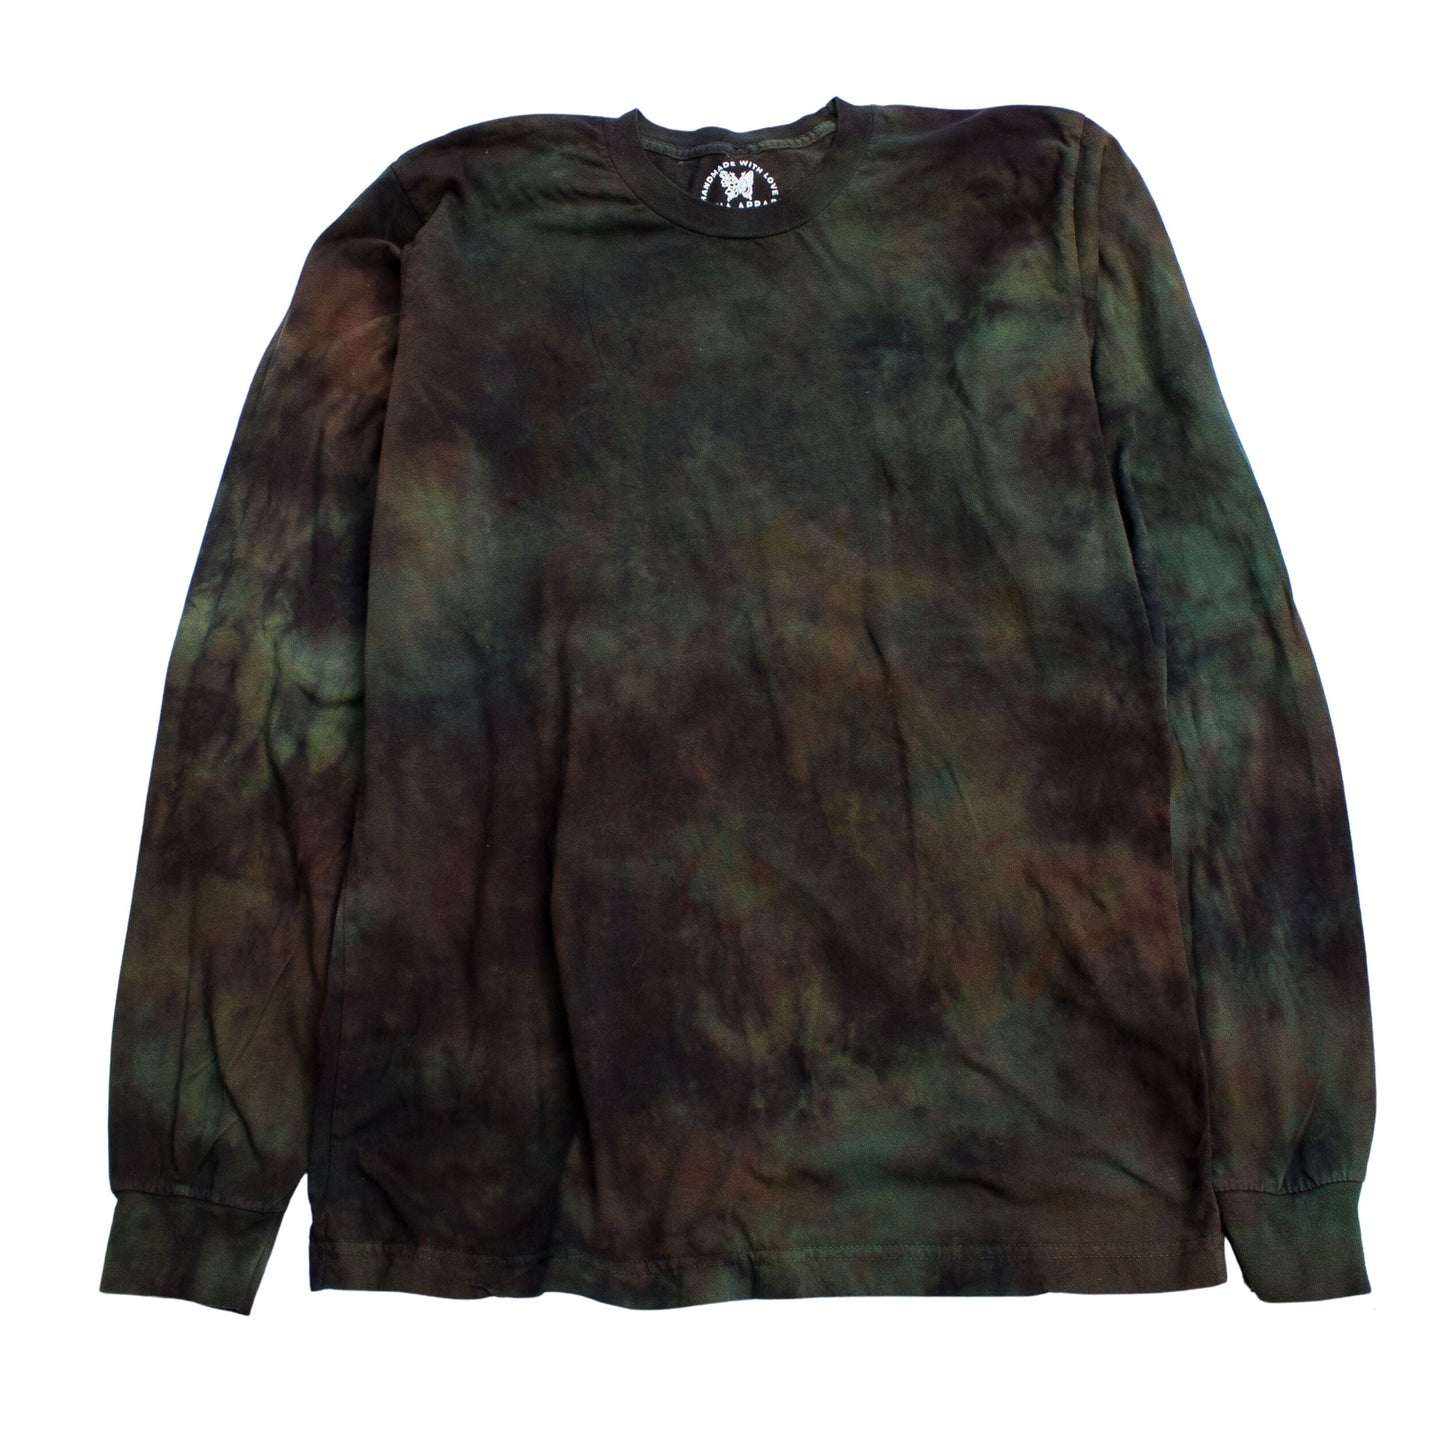 Forest Hues: Camouflage-Inspired Tie-Dye Long Sleeve Cotton Top